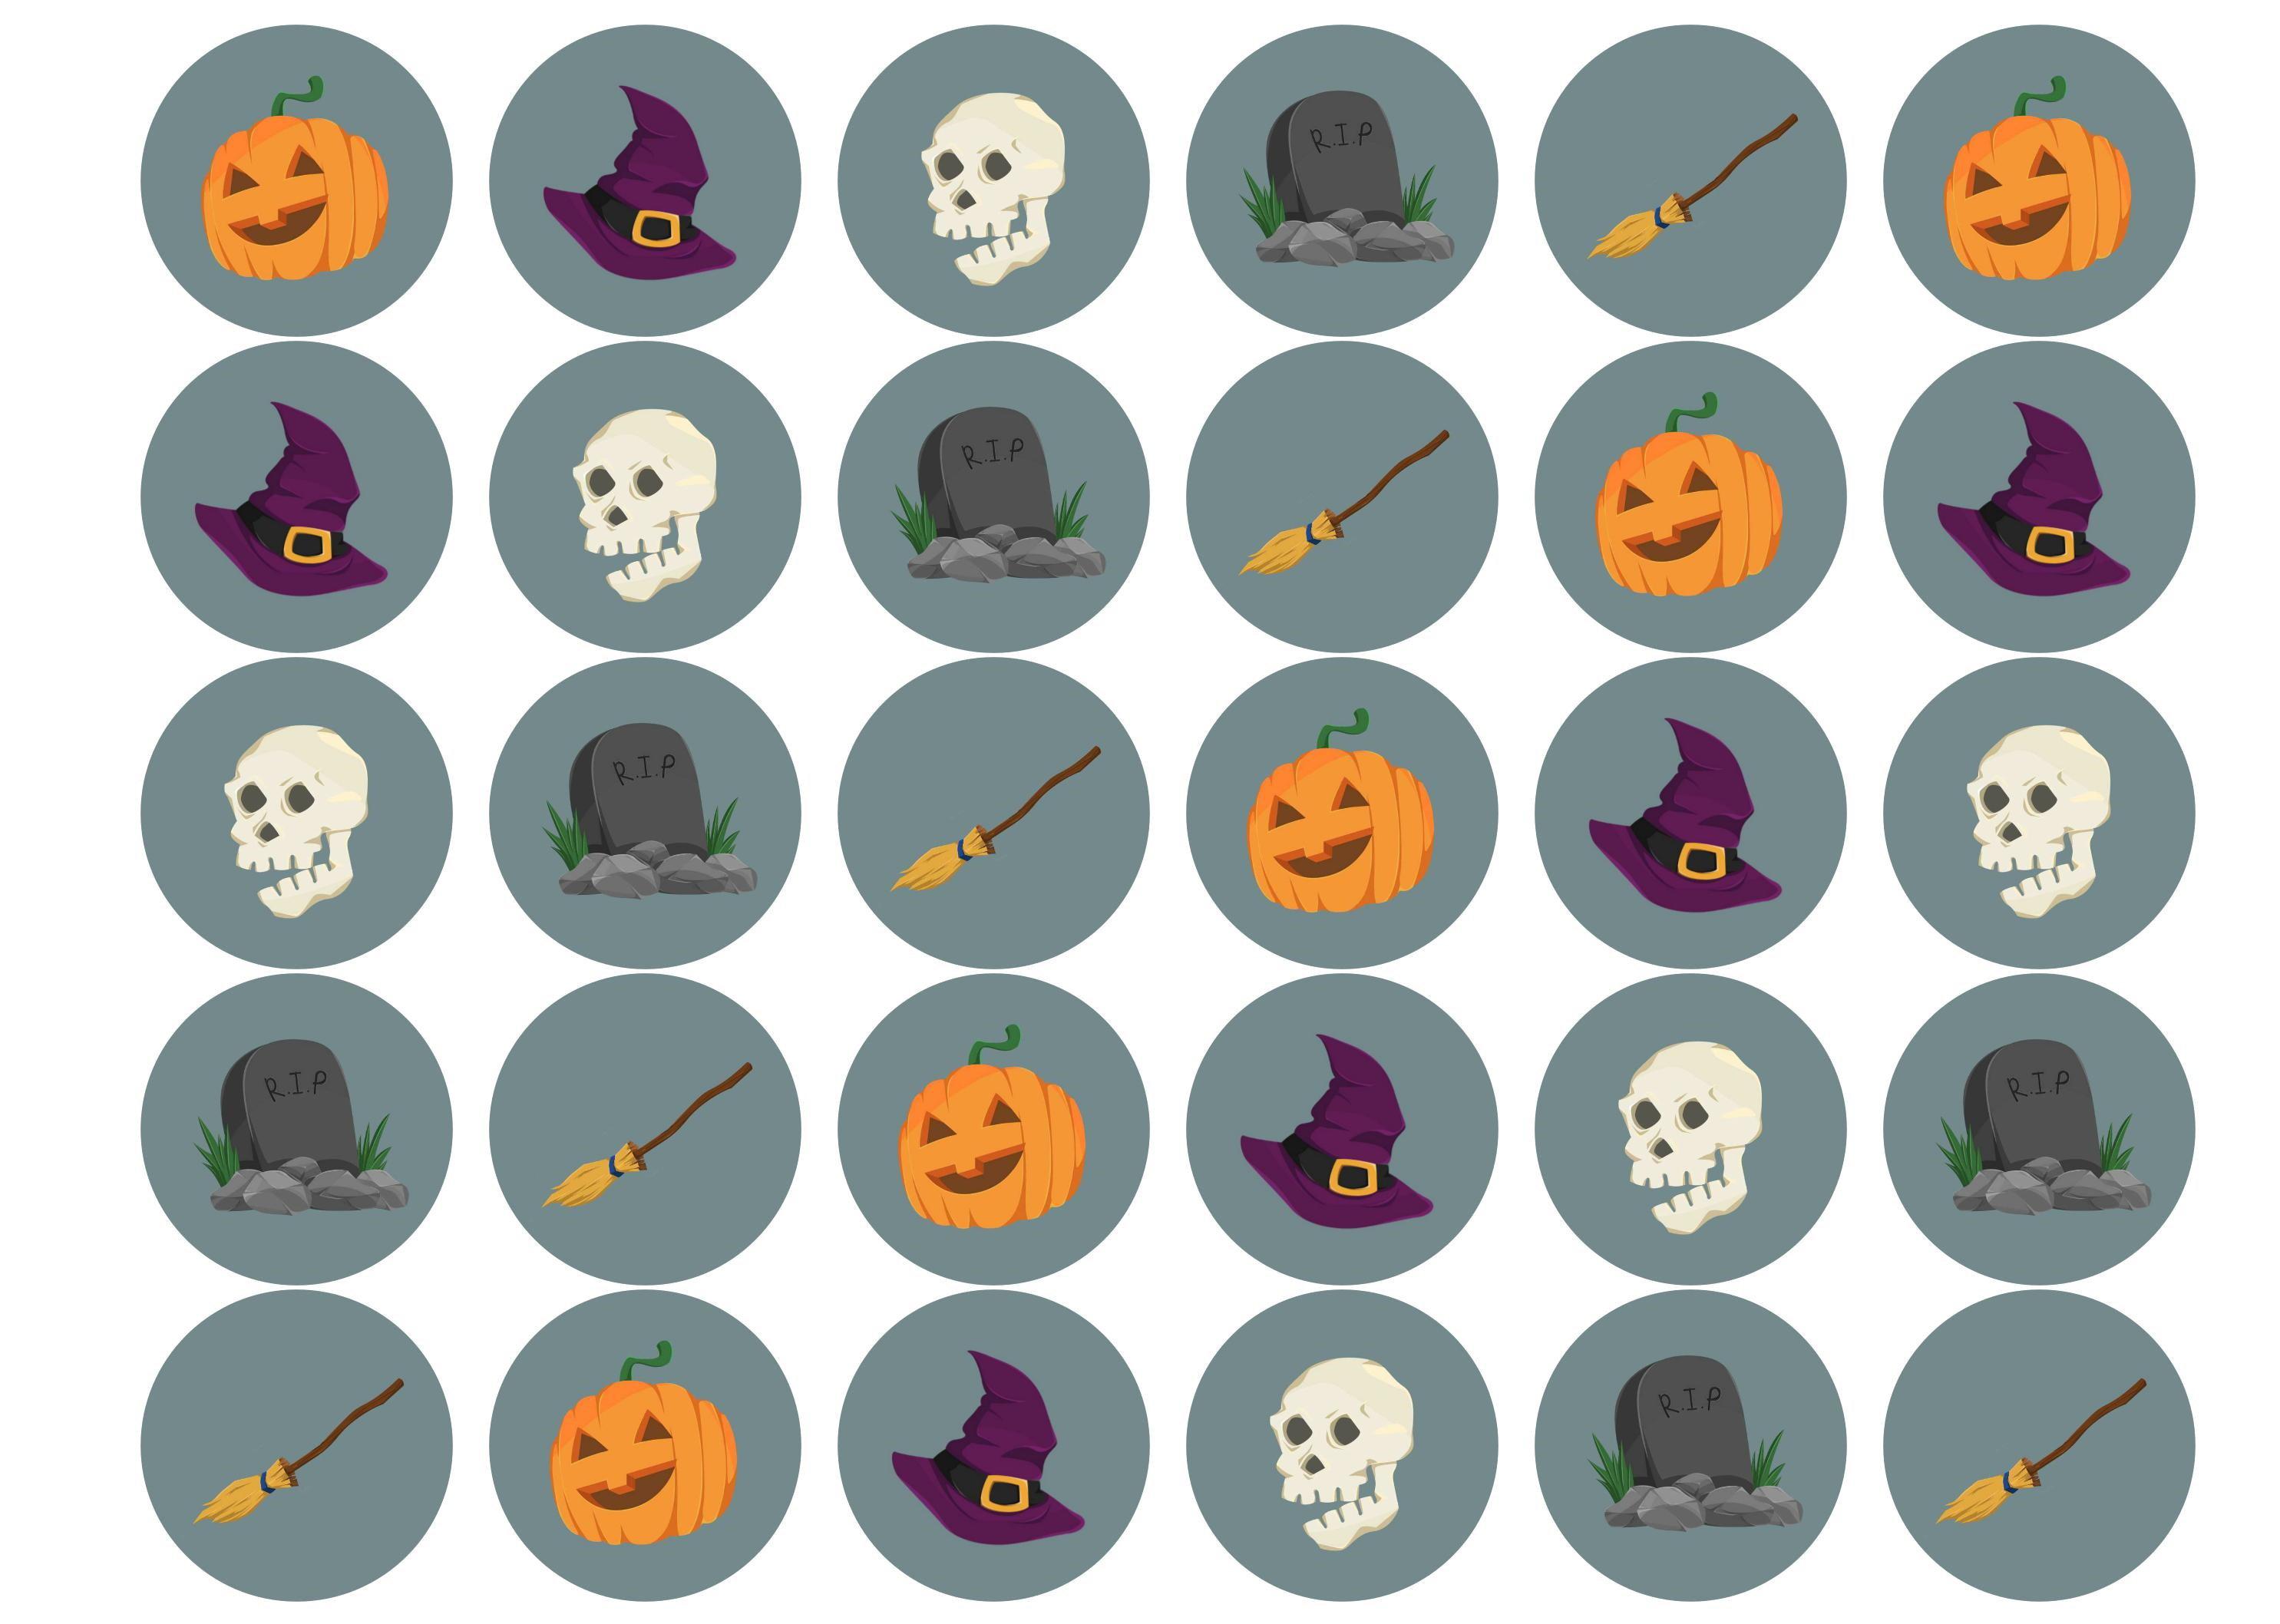 30 edible printed cupcake toppers with grey halloween designs